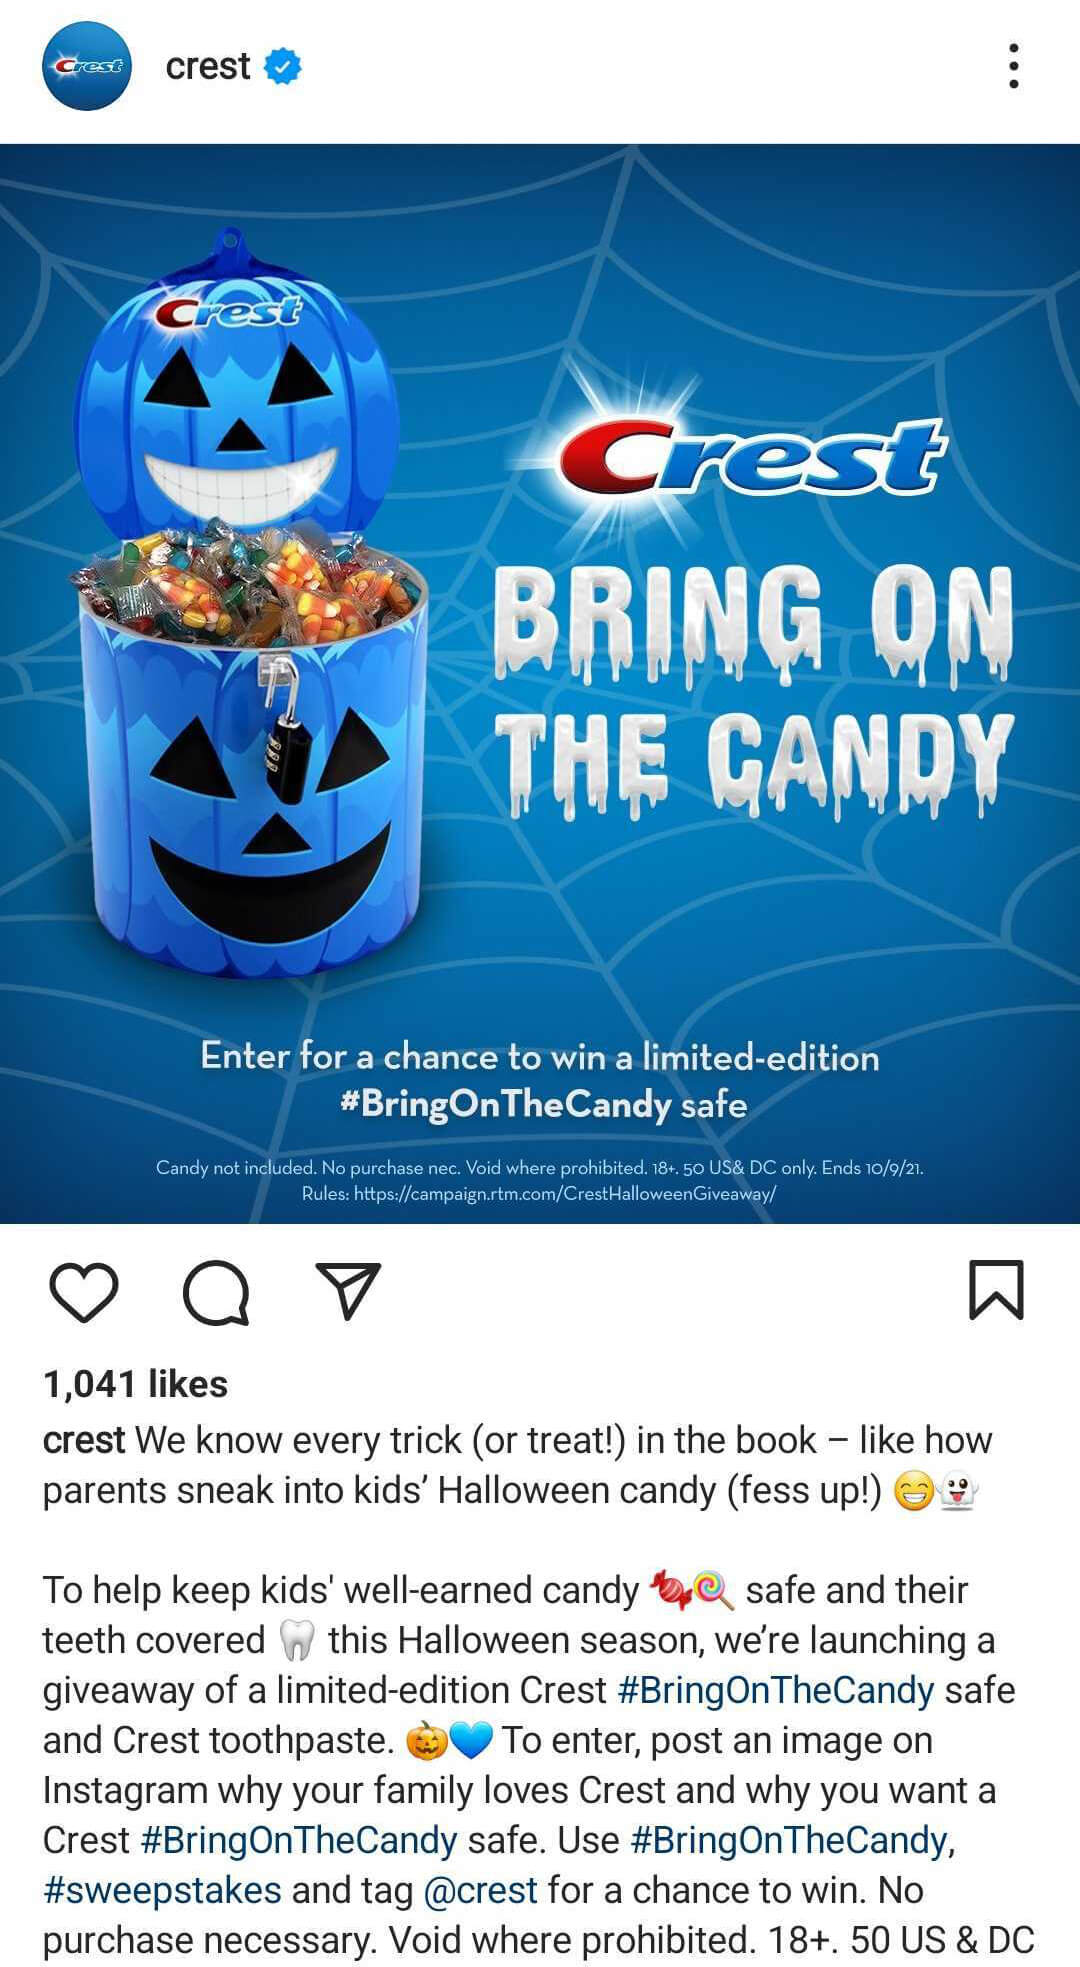 social-media-marketing-guide-holiday-campaigns-2022-elements-execution-timelines-halloween-crest-instagram-example-1